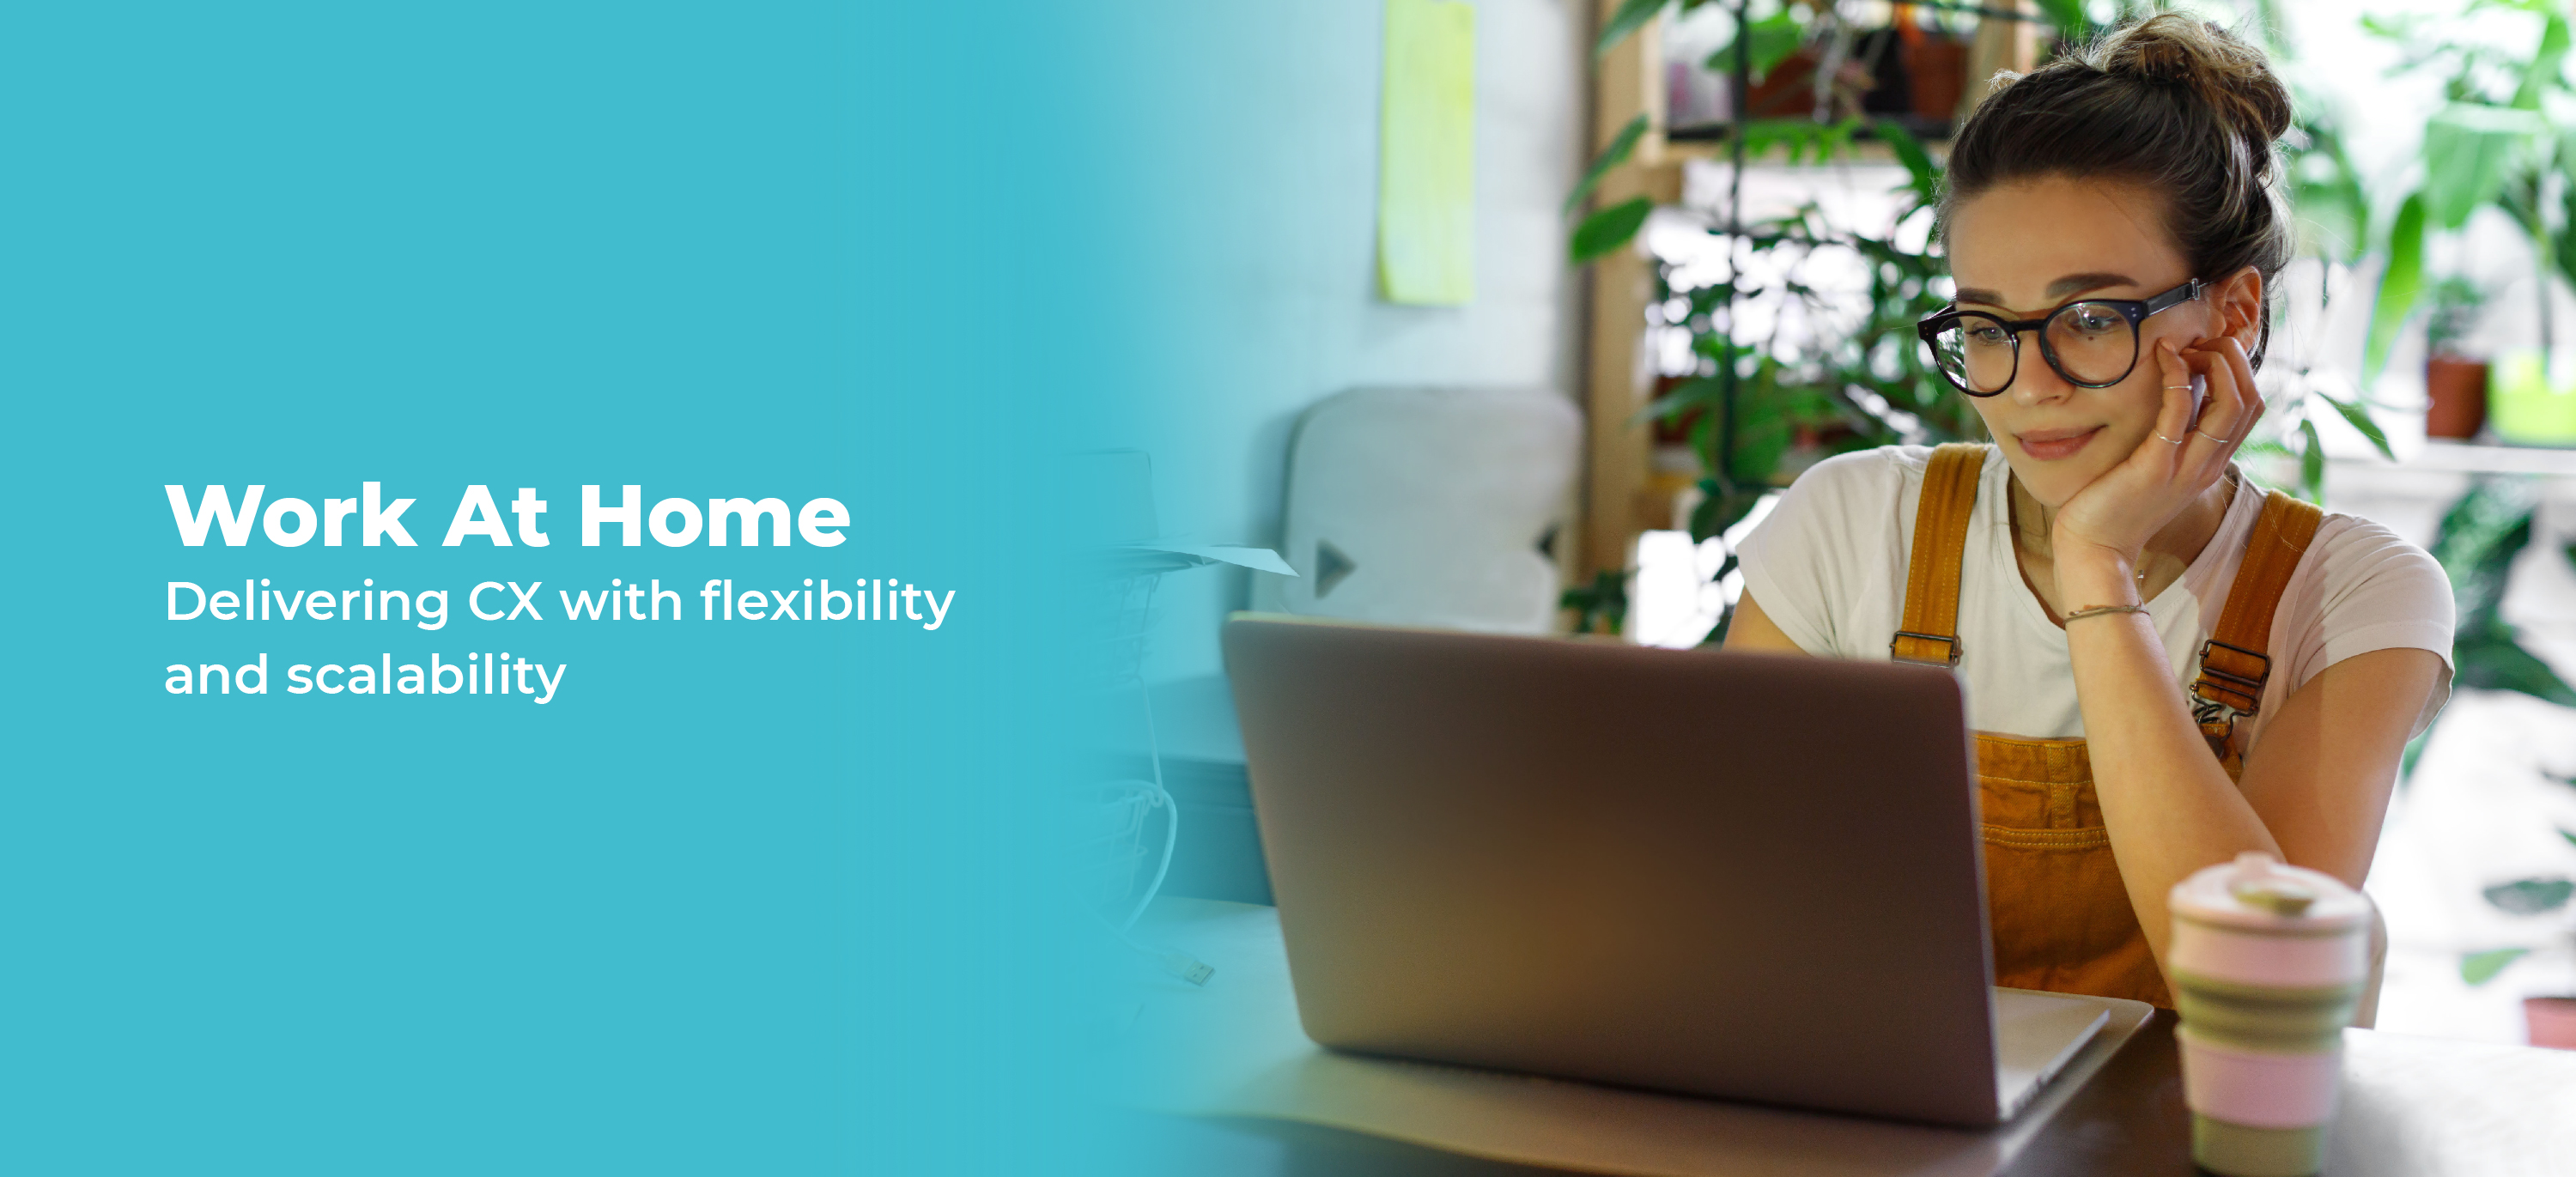 work at home delivering cx with flexibility and scalability